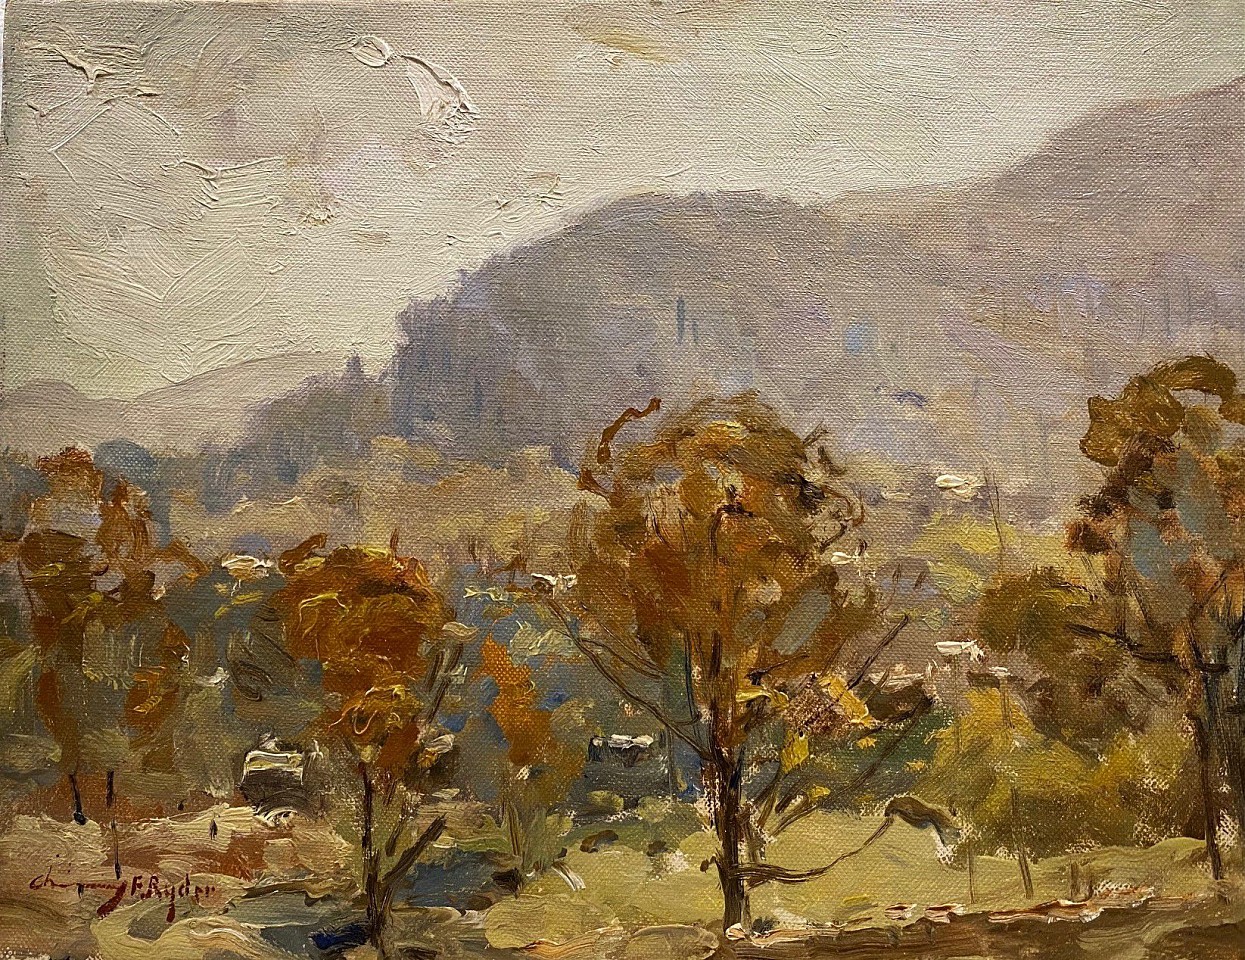 Chauncey Foster Ryder, In The Valley
oil on canvas, 12"" x 16""
JCA 6602
$3,500